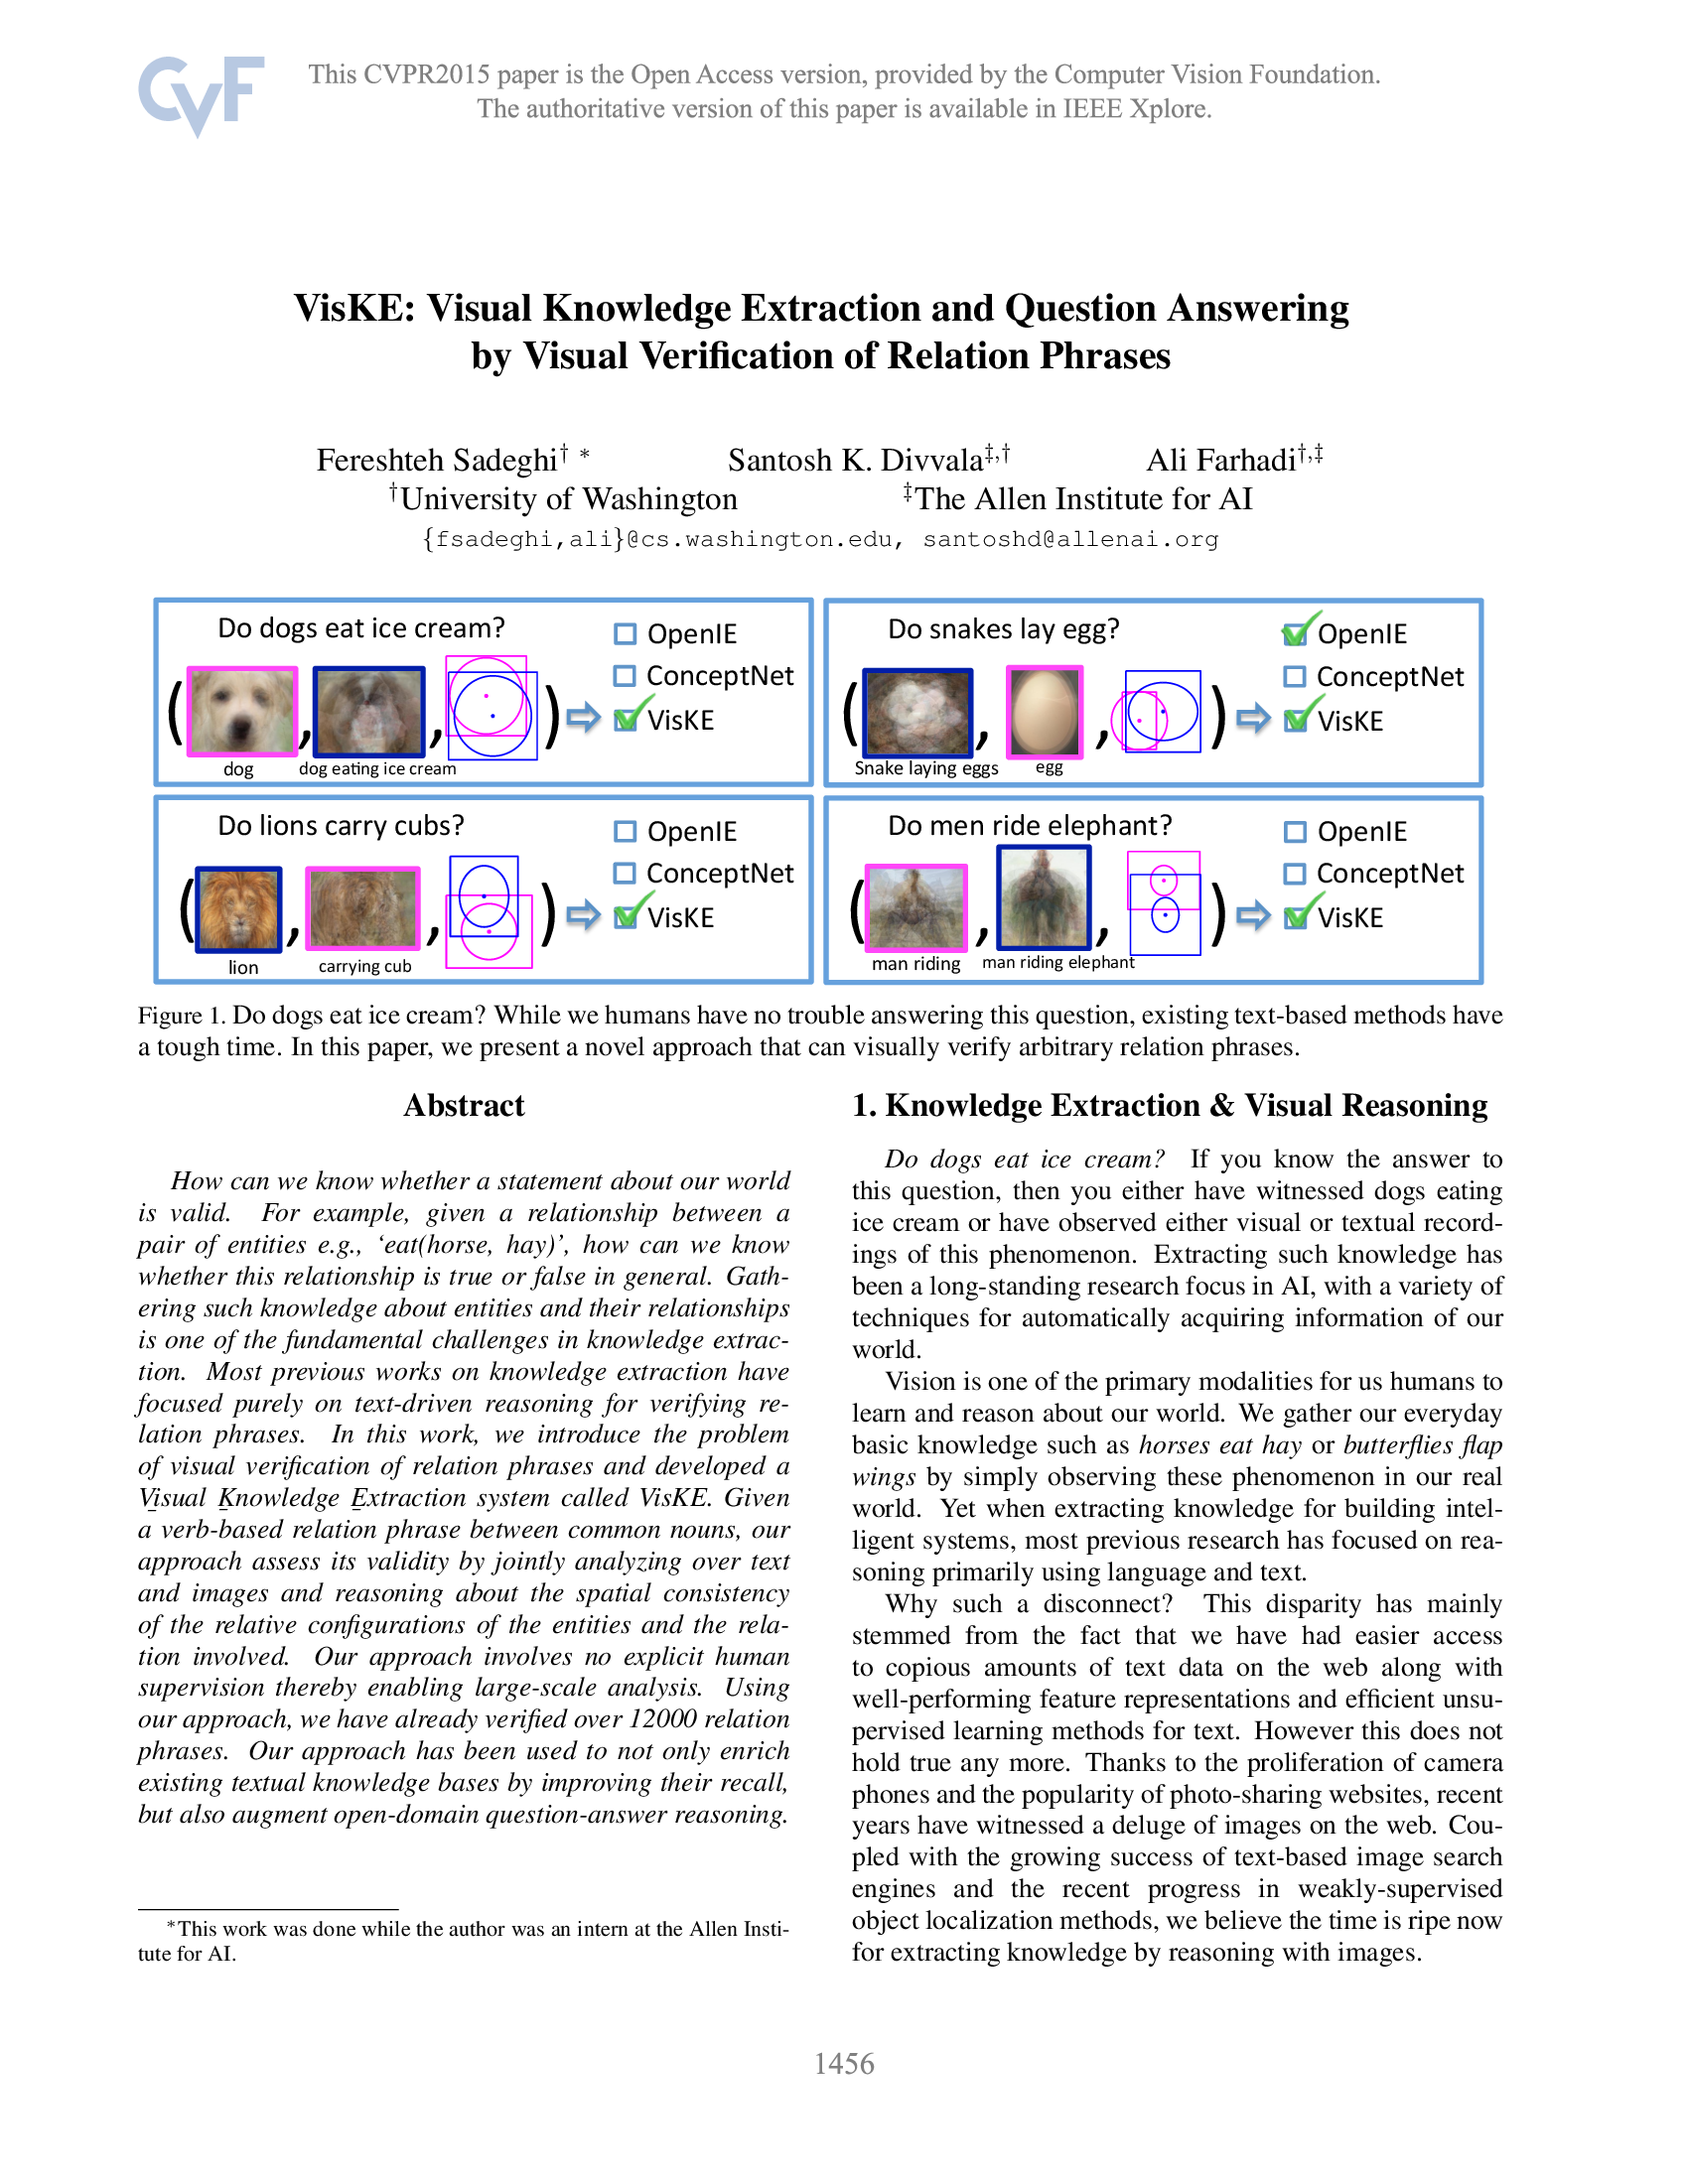 VisKE: Visual knowledge extraction and question answering by visual verification of relation phrases